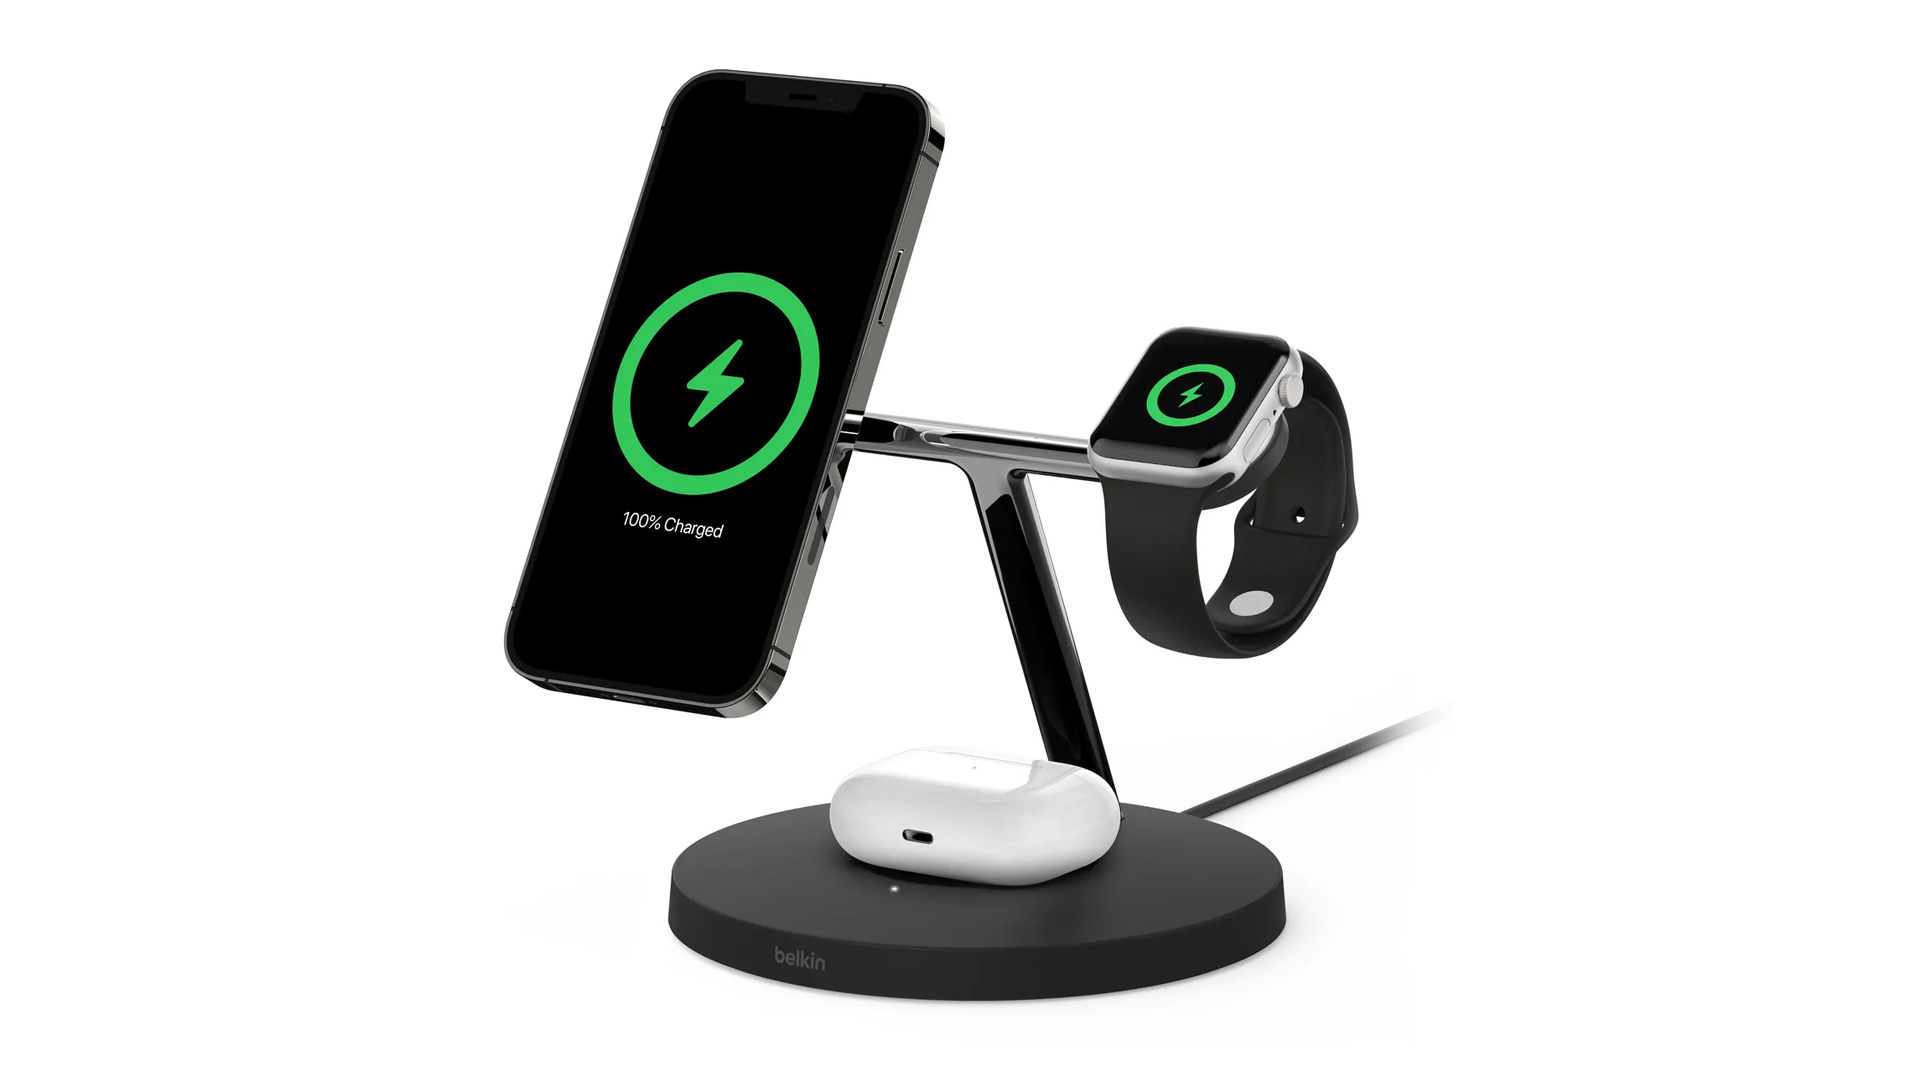 Belkin launches new 3-in-1 stand that fast charges Apple Watch